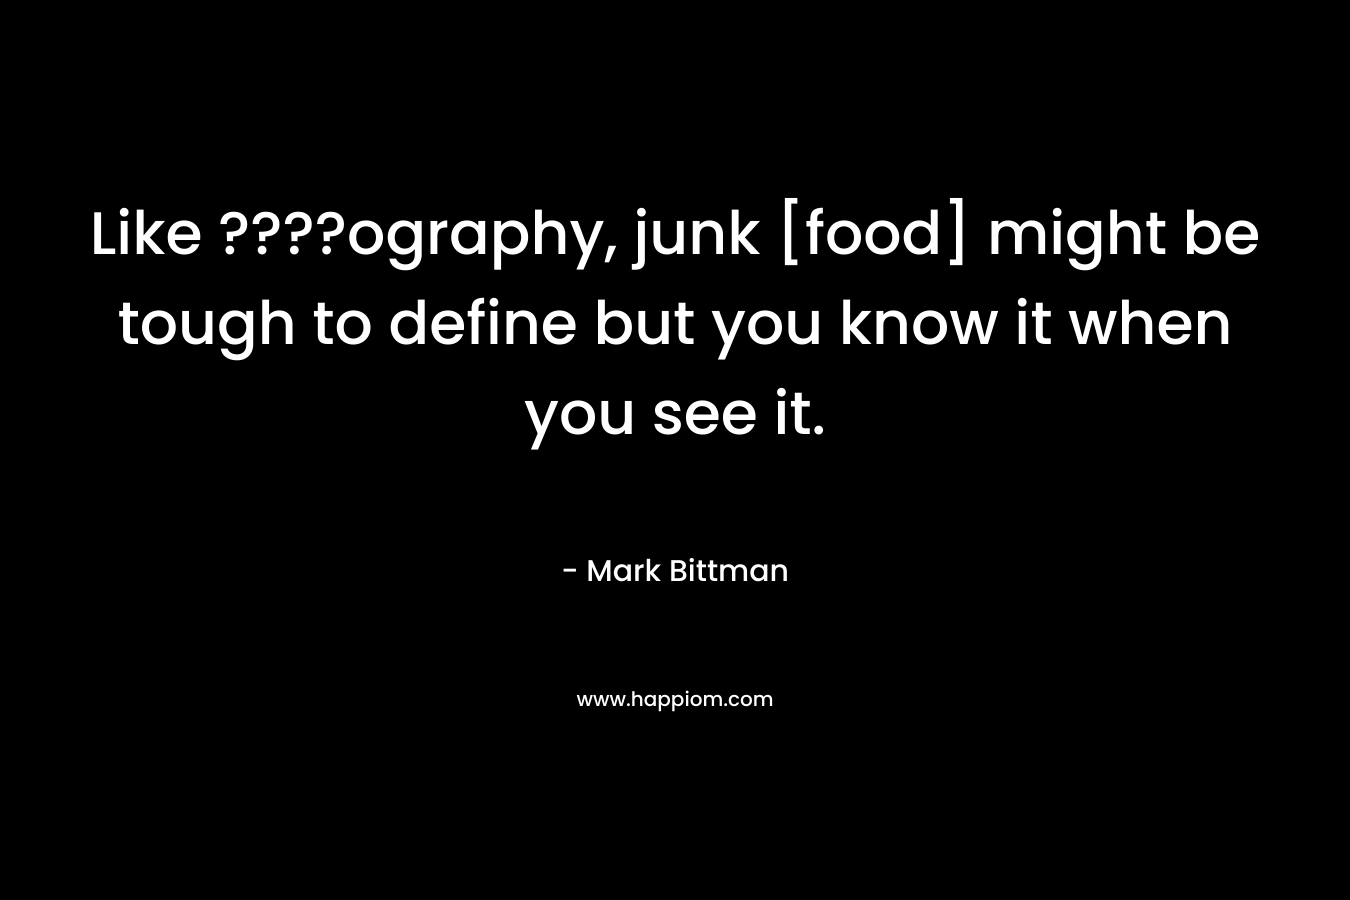 Like ????ography, junk [food] might be tough to define but you know it when you see it. – Mark Bittman